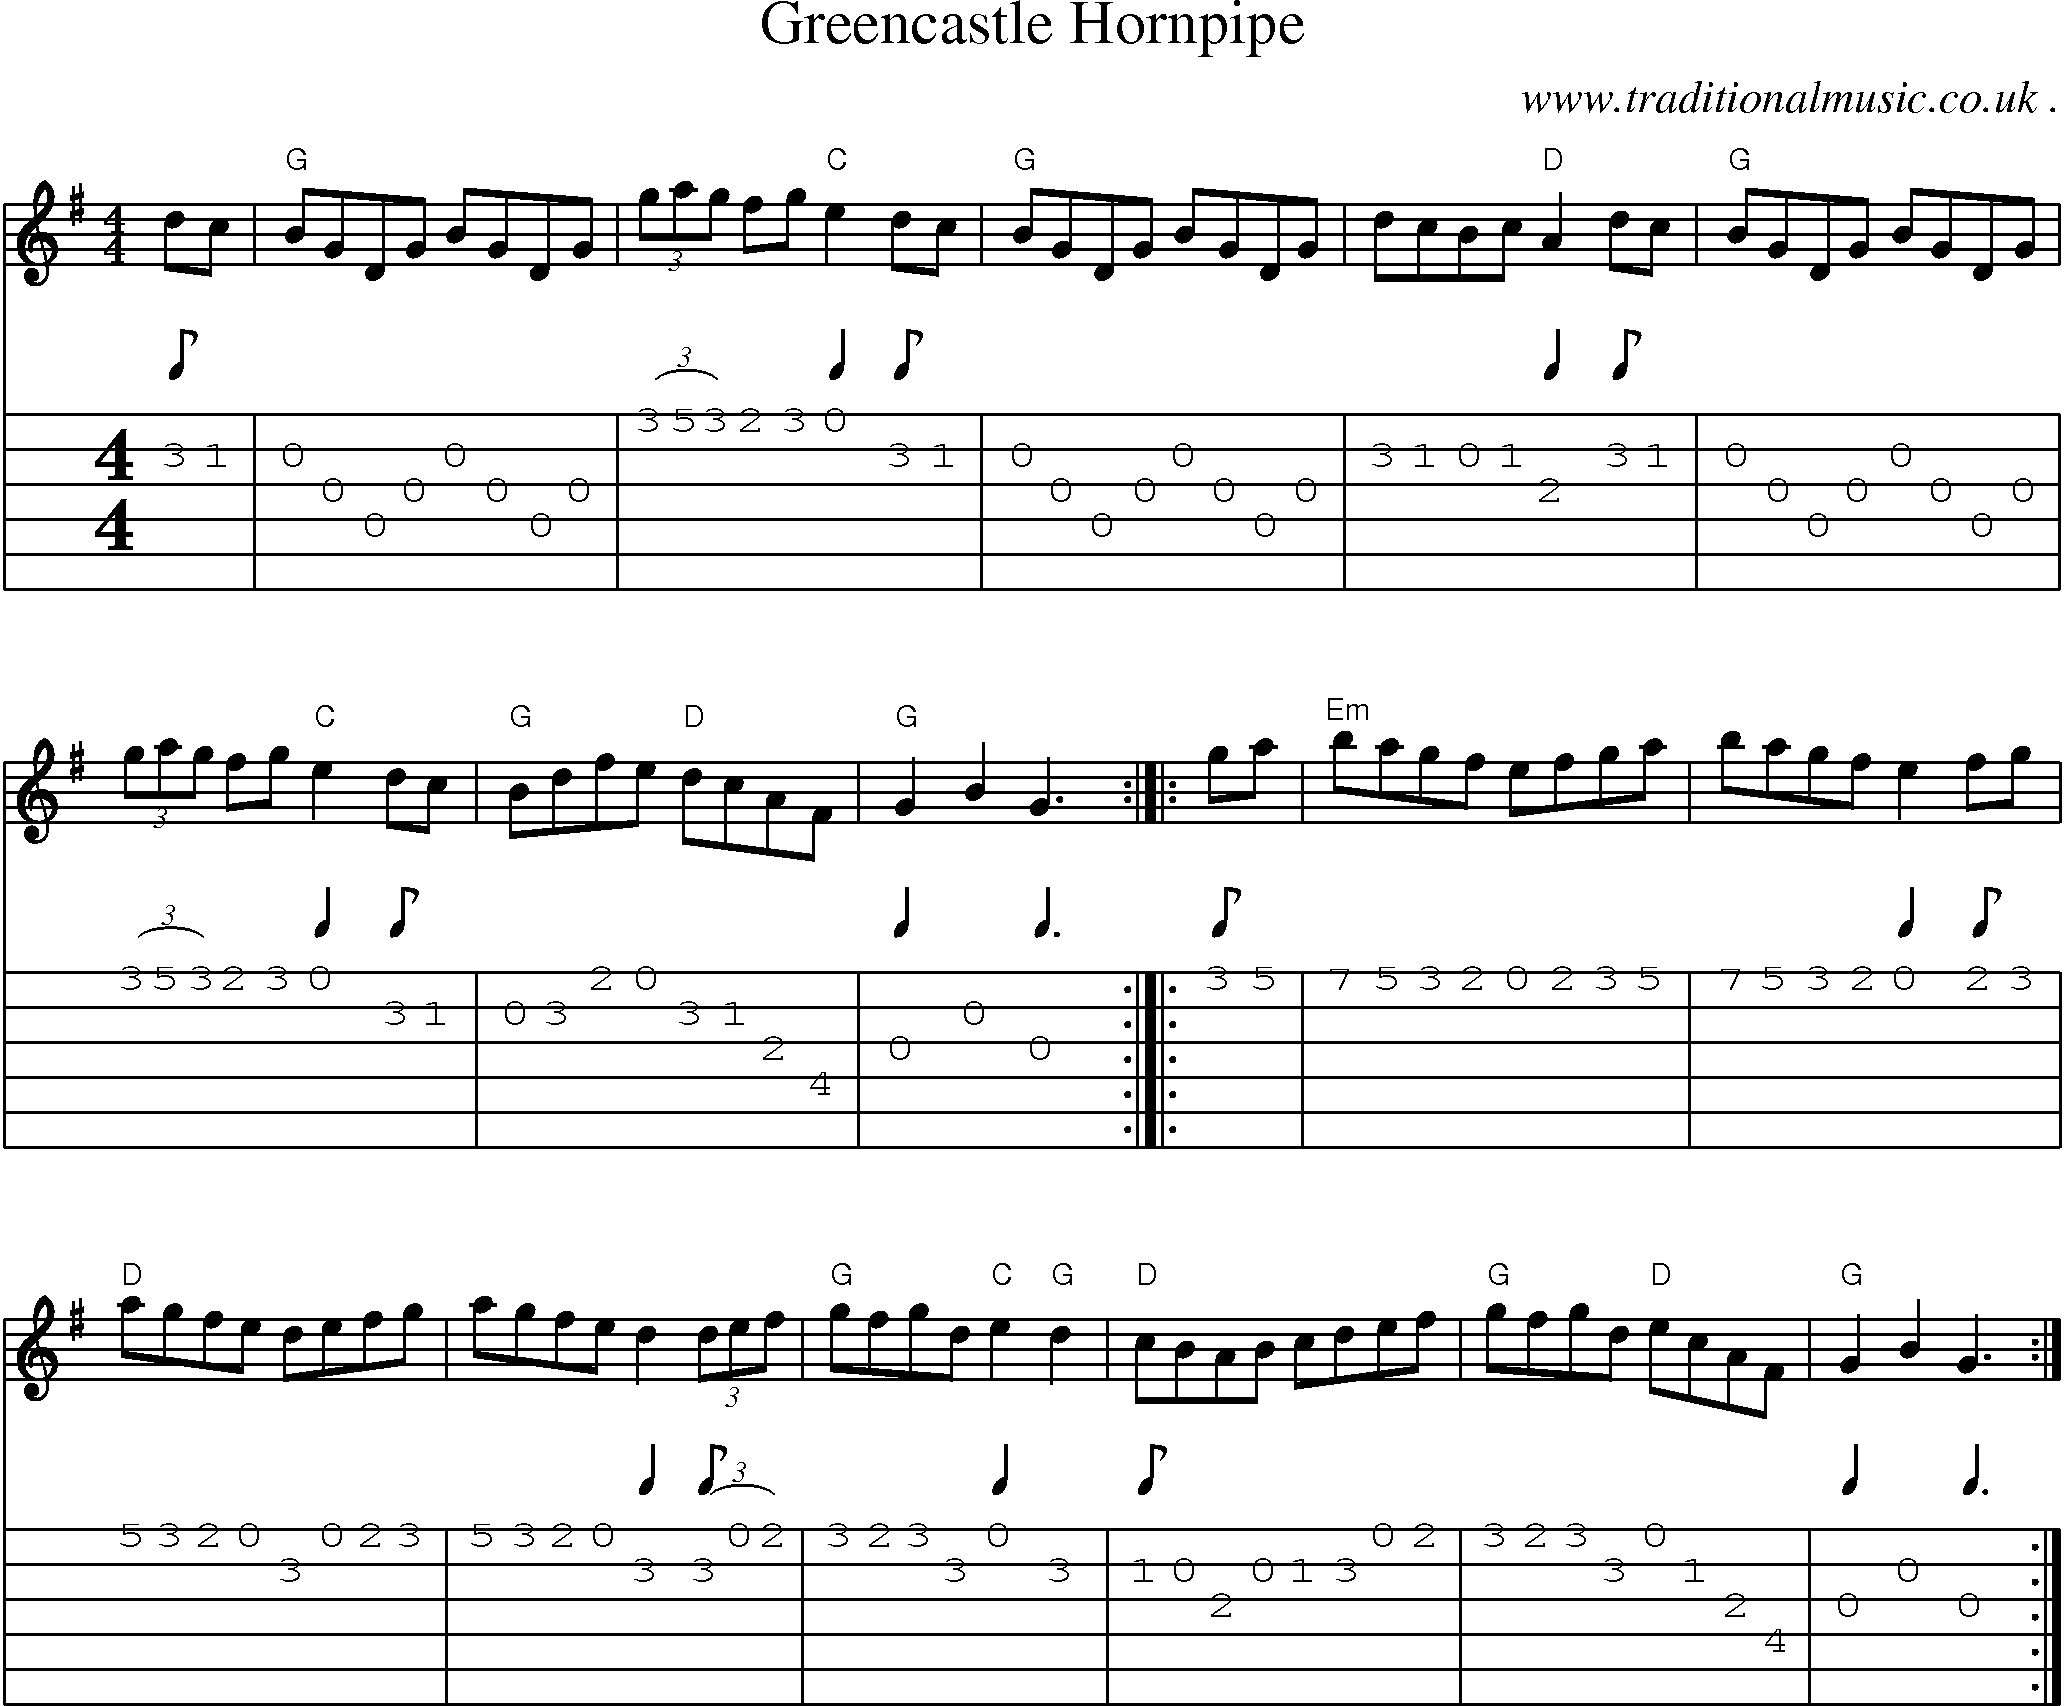 Music Score and Guitar Tabs for Greencastle Hornpipe